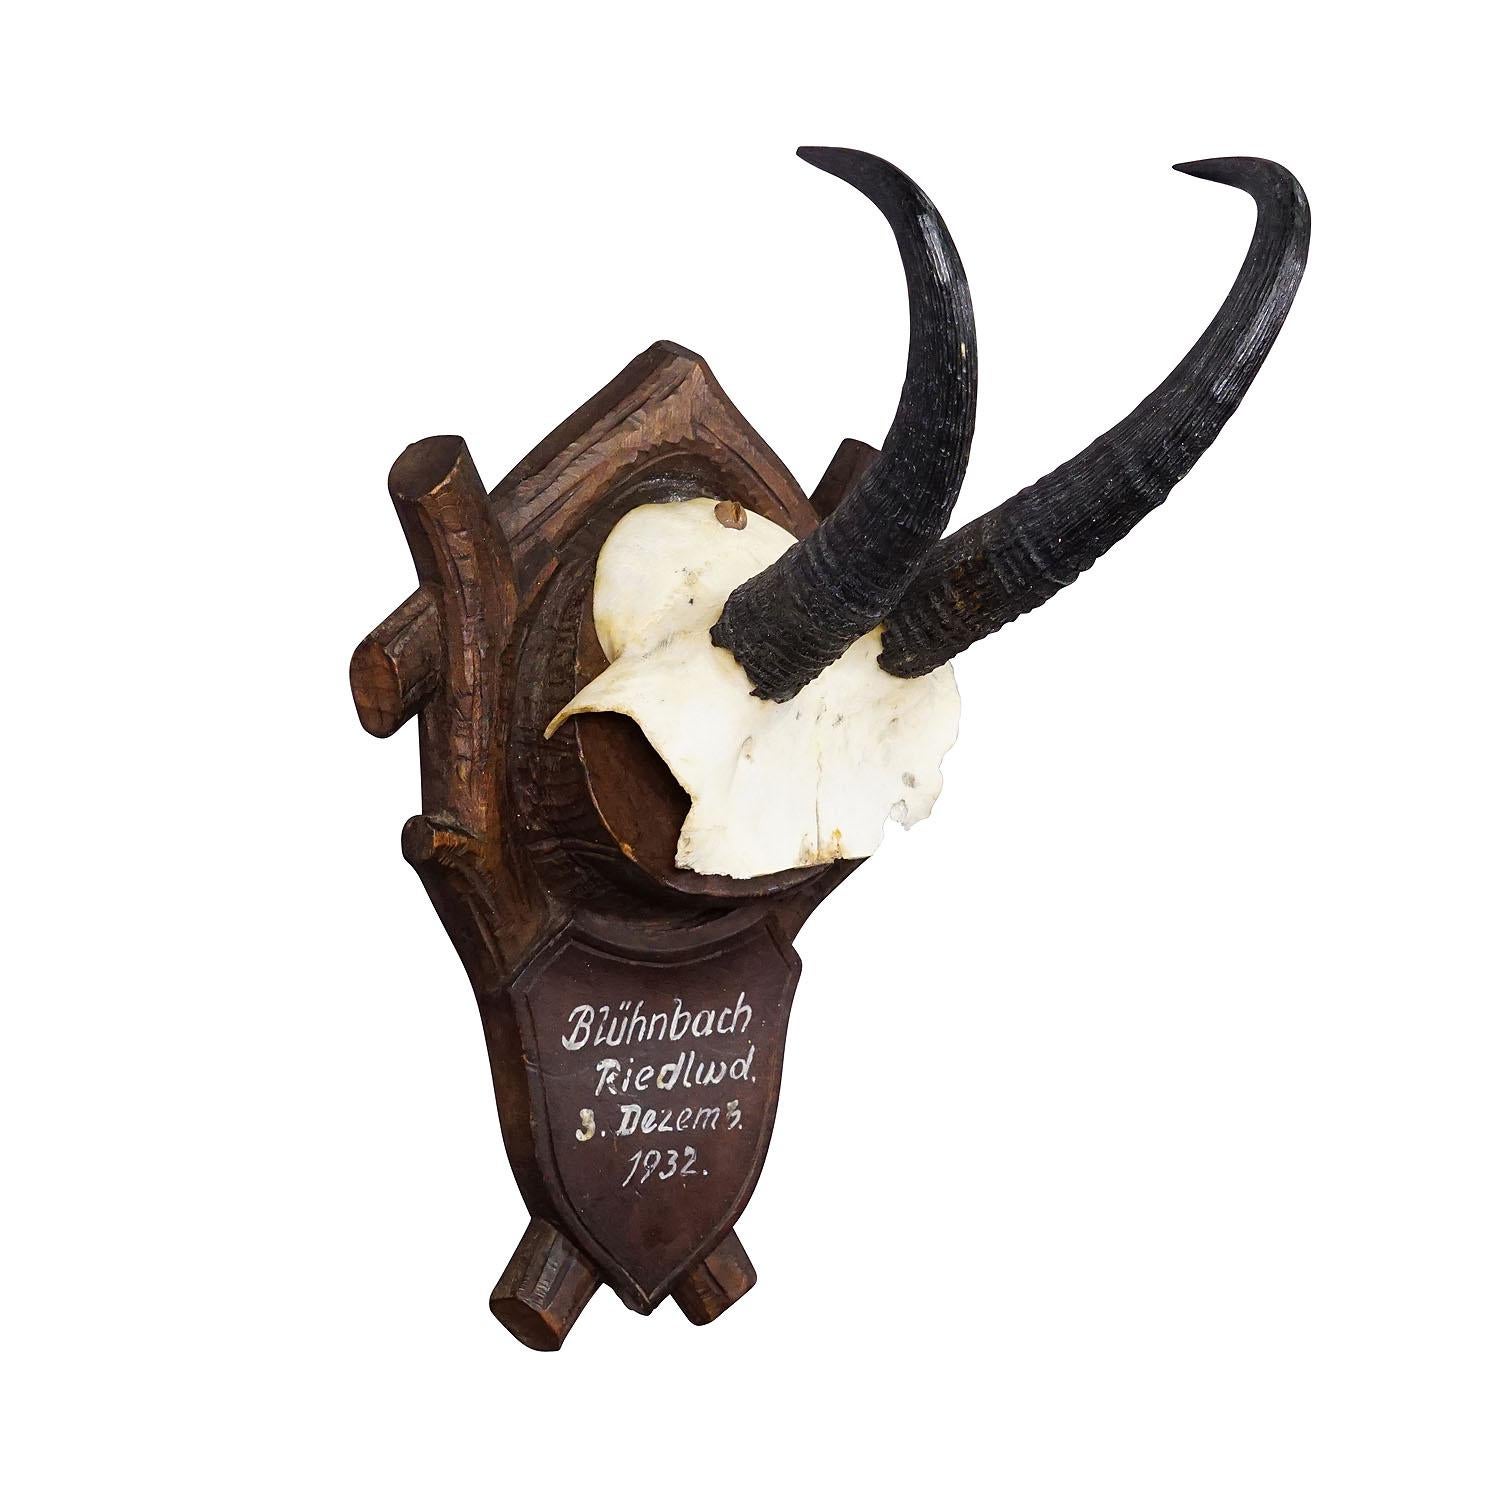 Black Forest Chamois Trophy on Carved Plaque, Germany 1932

An antique chamois (Rupicapra rupicapra) trophy mounted on a wooden carved plaque which features a handwritten inscription. The trophy was shot 1932 in the Bavarian pre-Alpine countryside.